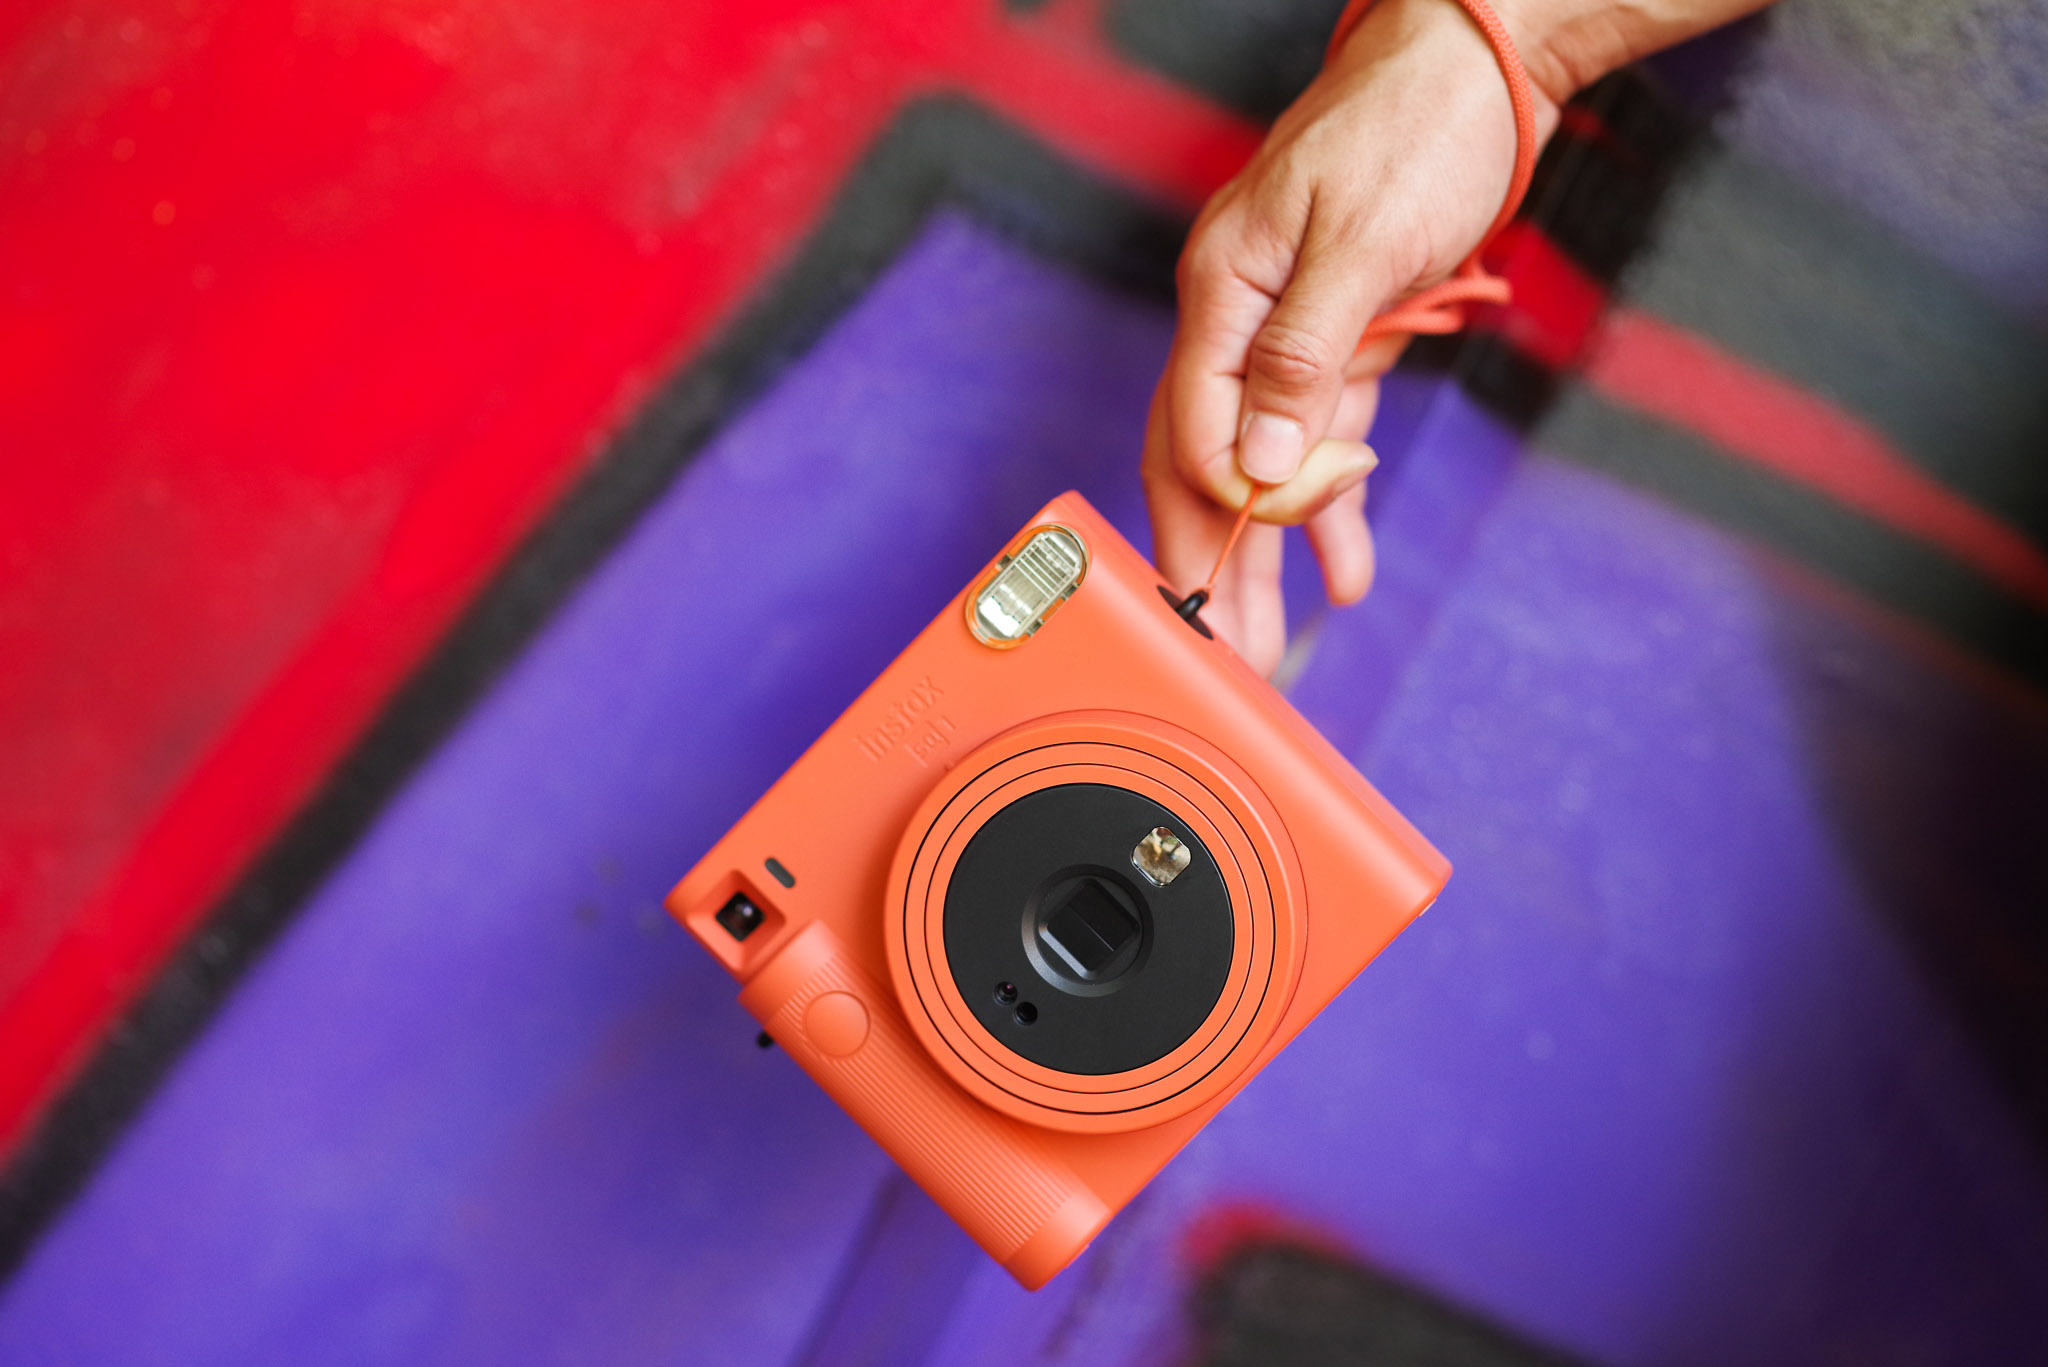 Room for squares: A field day with the Fujifilm Instax SQ1 - Daven Mathies